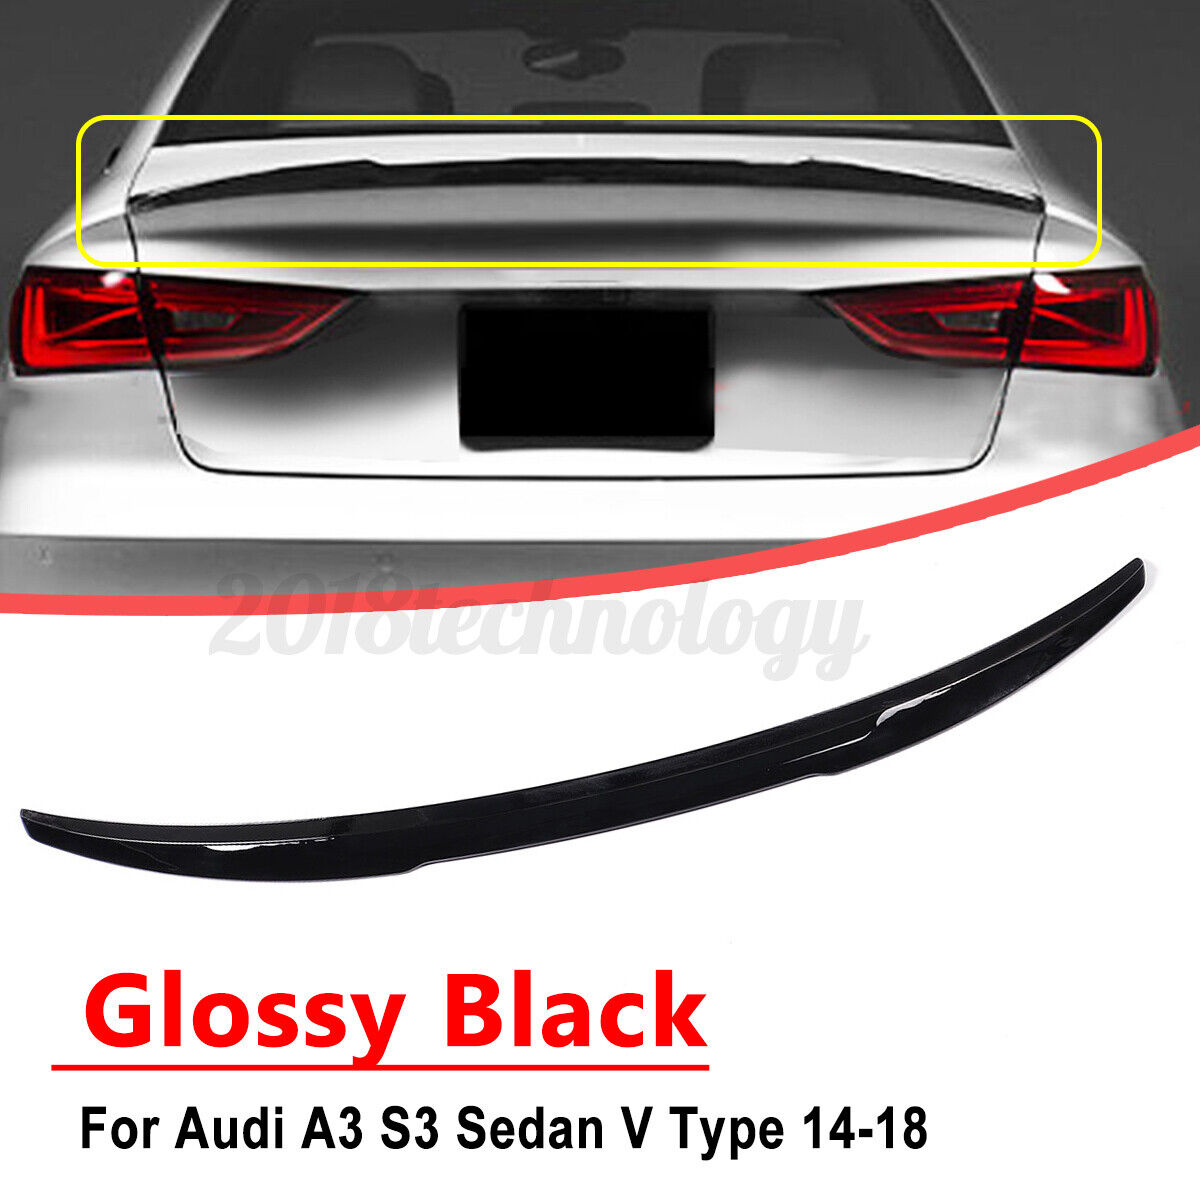 V Style Glossy Black Rear Spoiler Trunk Lip Wing For Audi A3 and S3 Seda